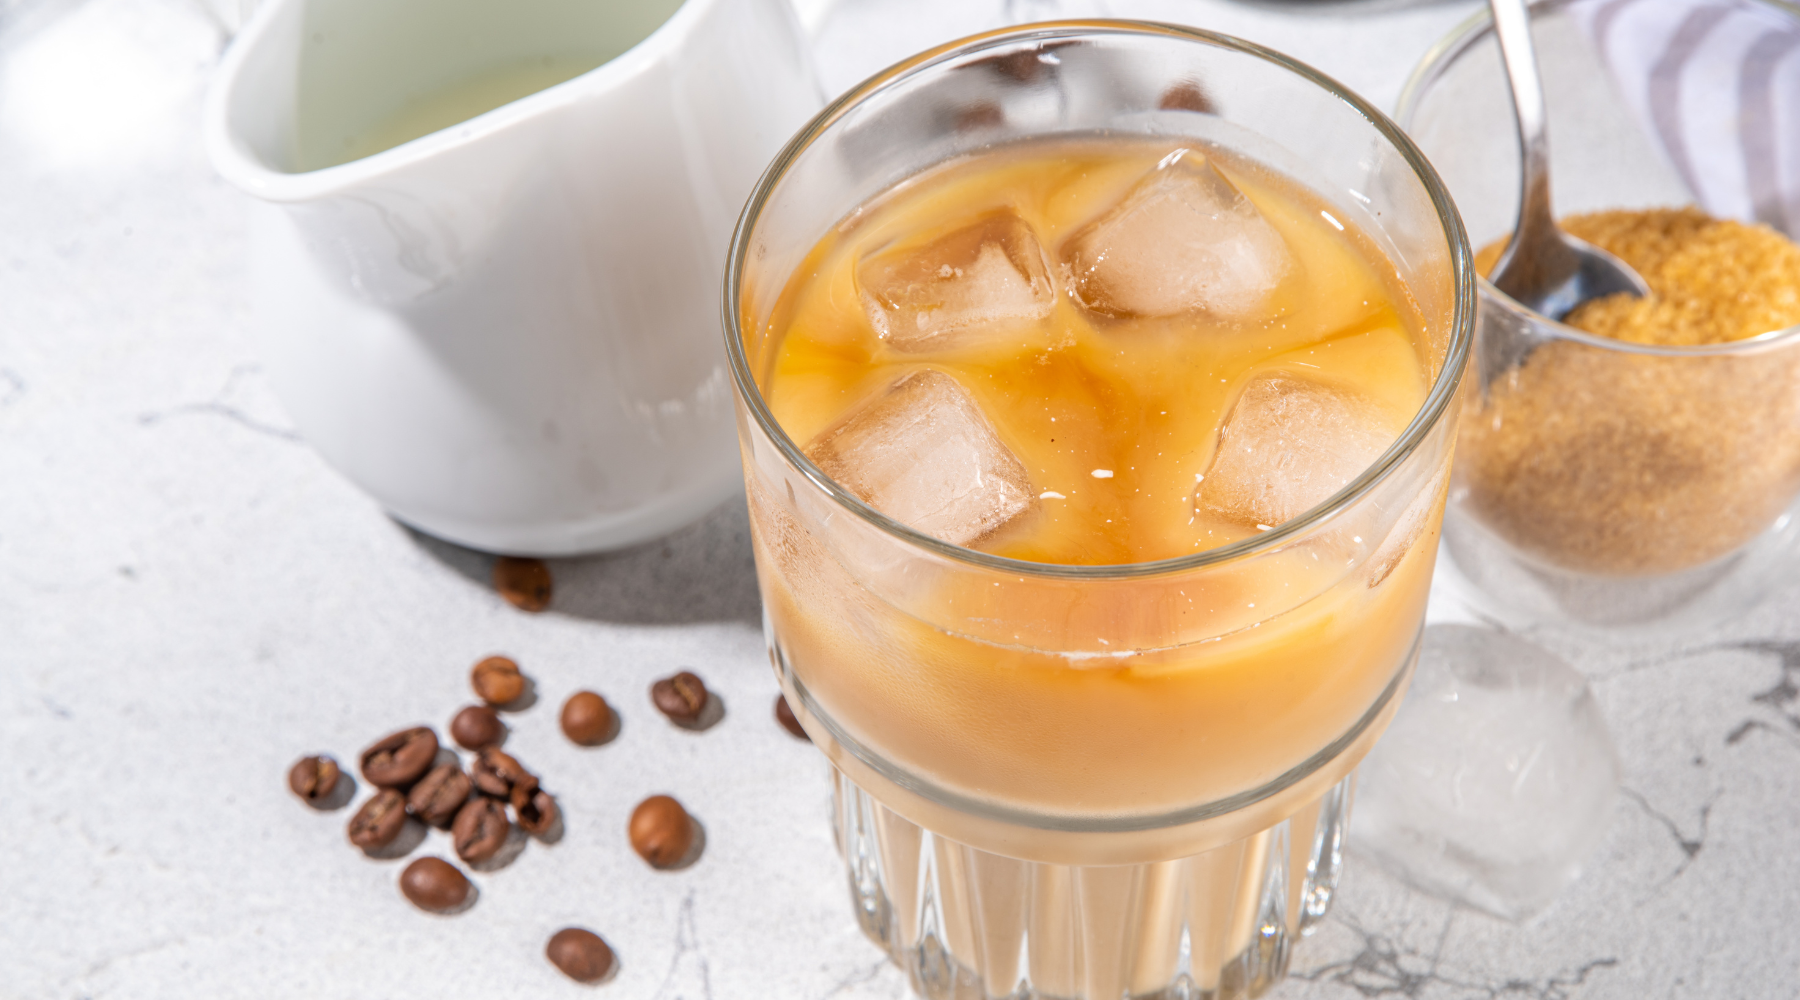 Can I make iced coffee at home?